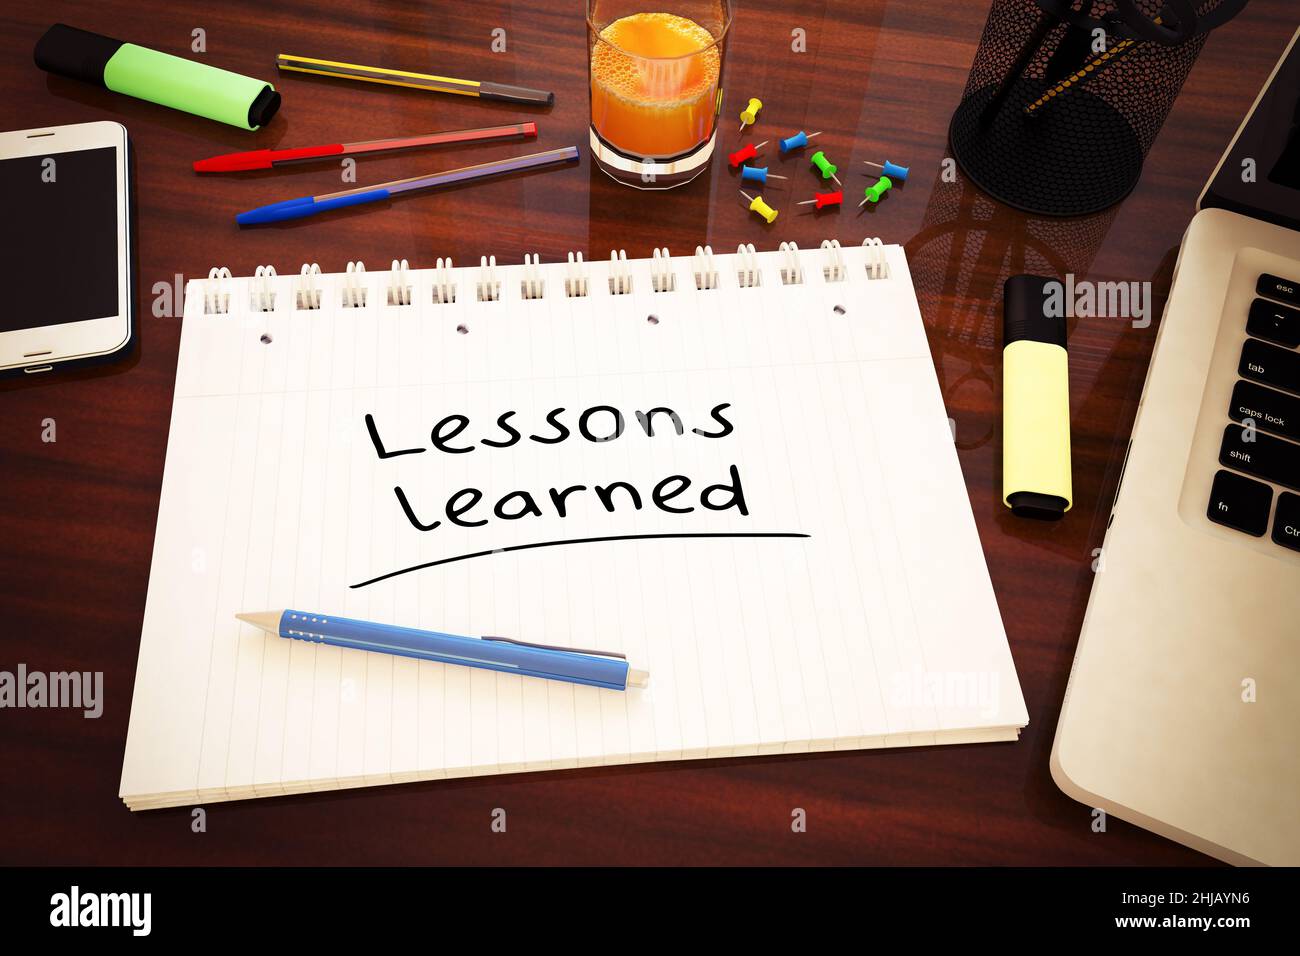 931,060 Lessons Learned Images, Stock Photos, 3D objects, & Vectors